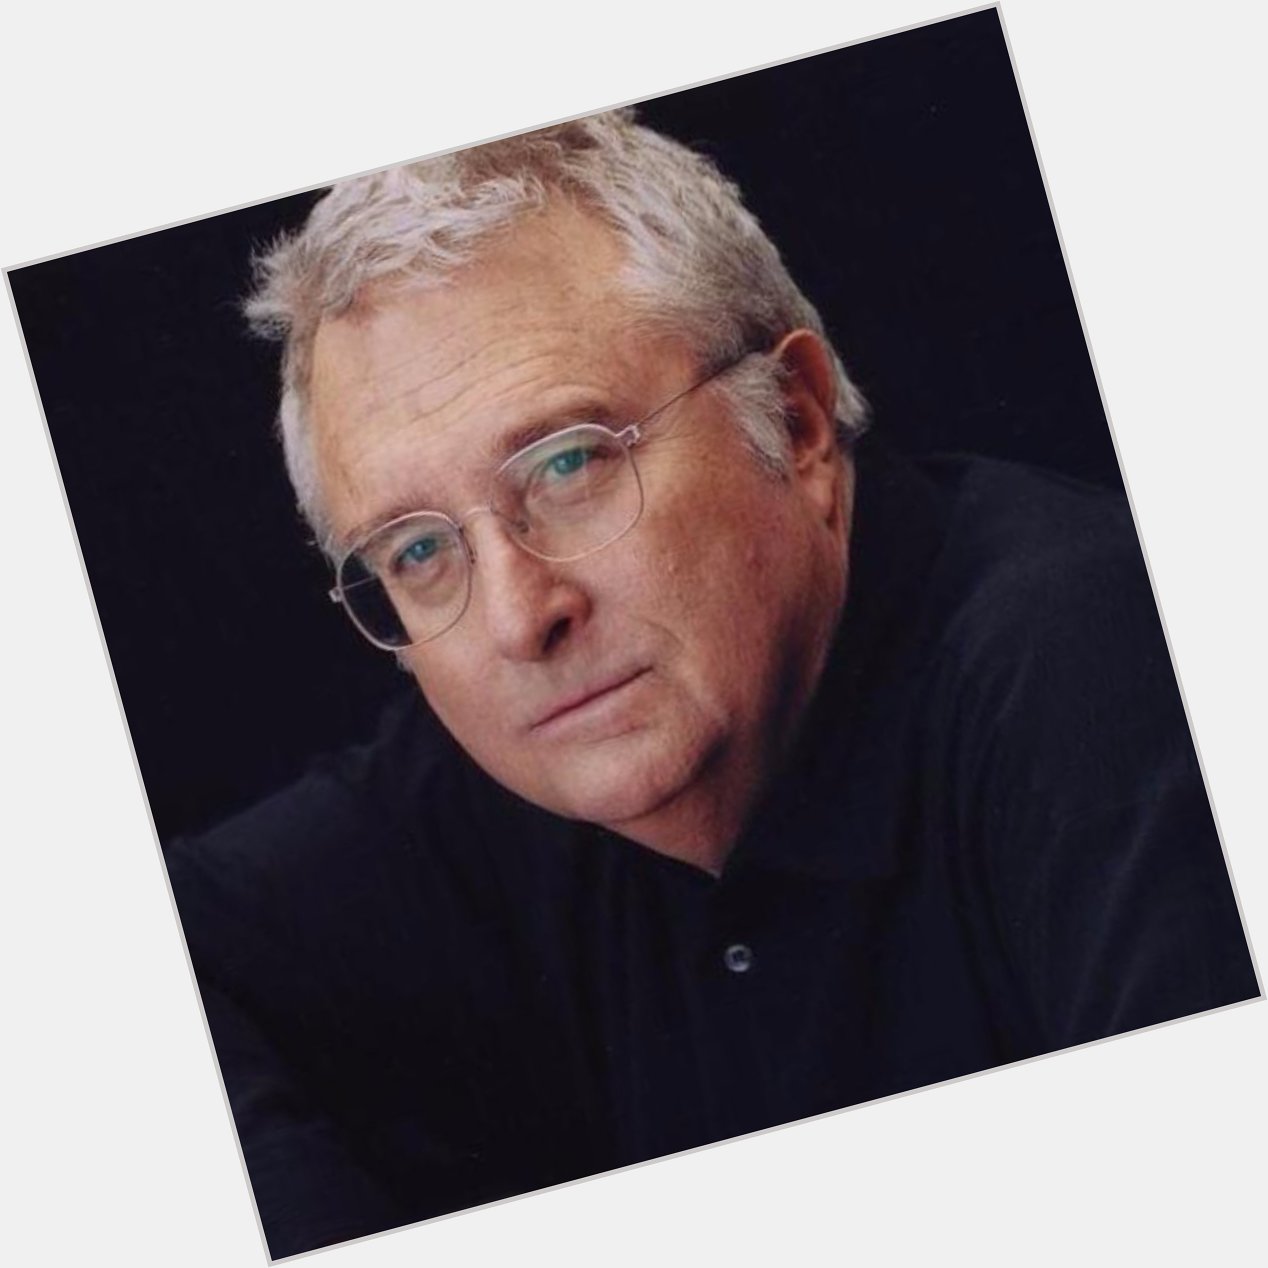 A Big BOSS Happy Birthday today to Randy Newman from all of us at The Boss! 